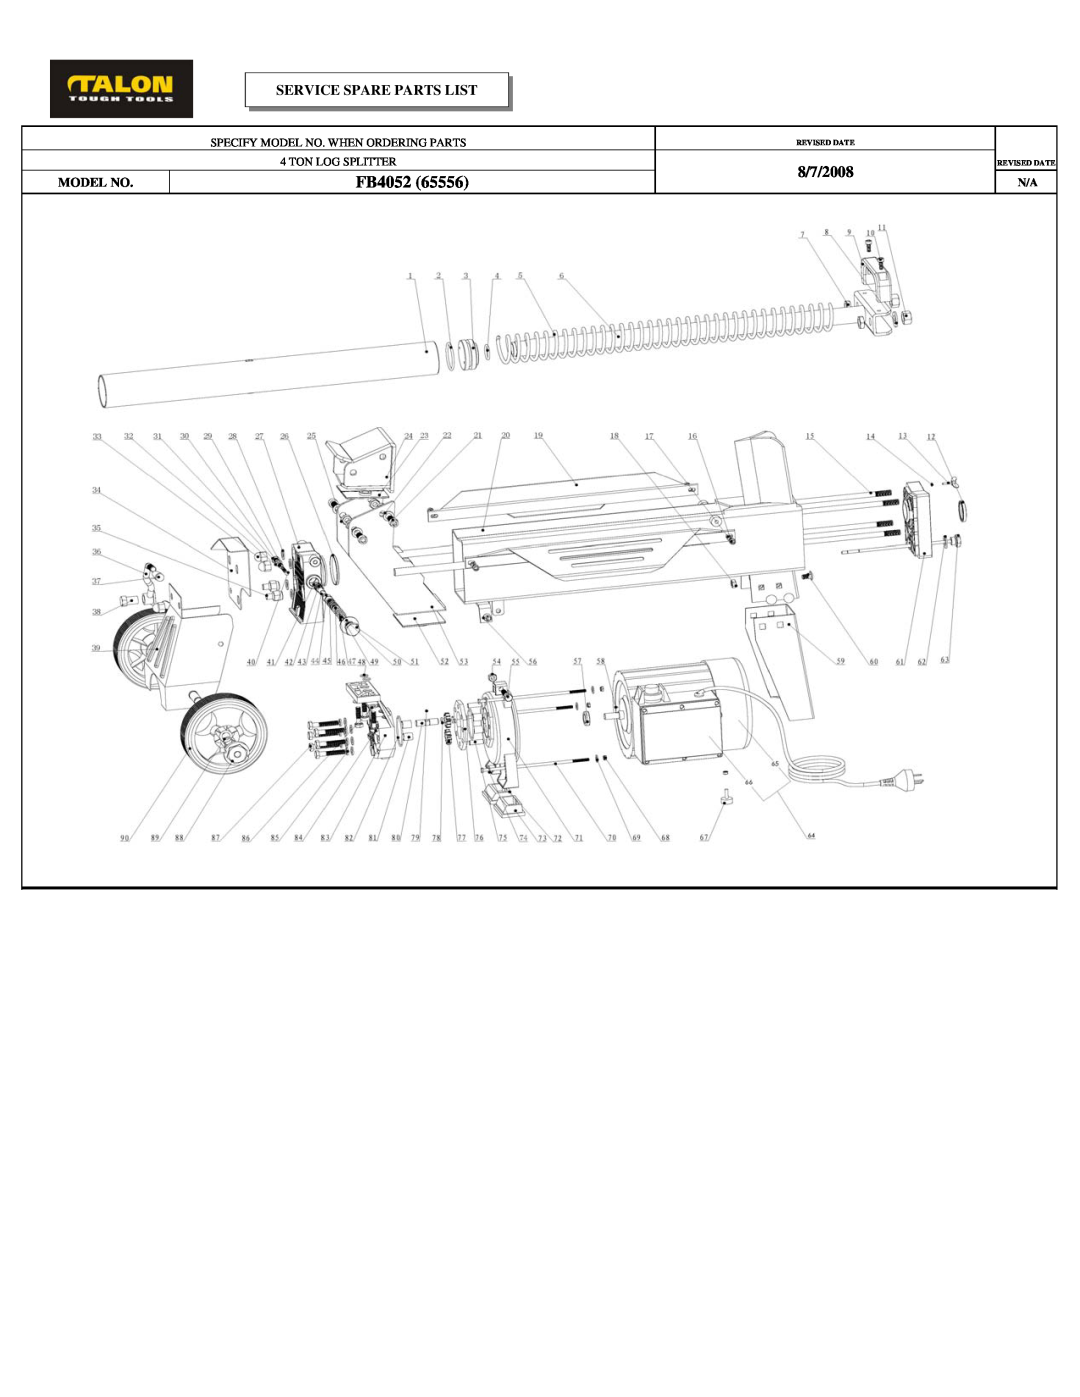 Poulan 65556 manual FB4052, Service Spare Parts List, Specify Model No. When Ordering Parts, Ton Log Splitter 